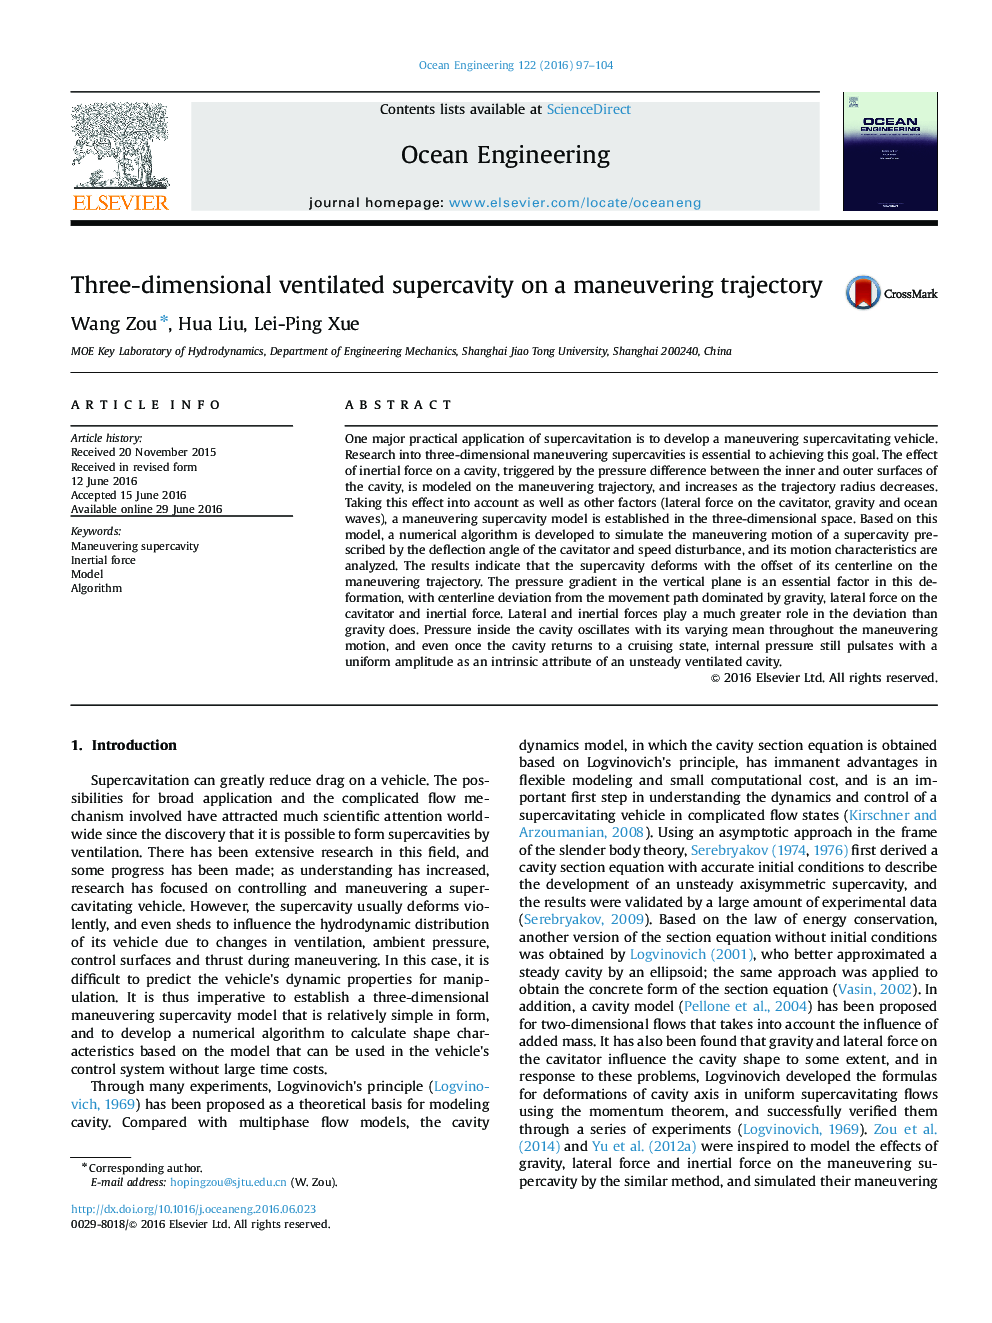 Three-dimensional ventilated supercavity on a maneuvering trajectory